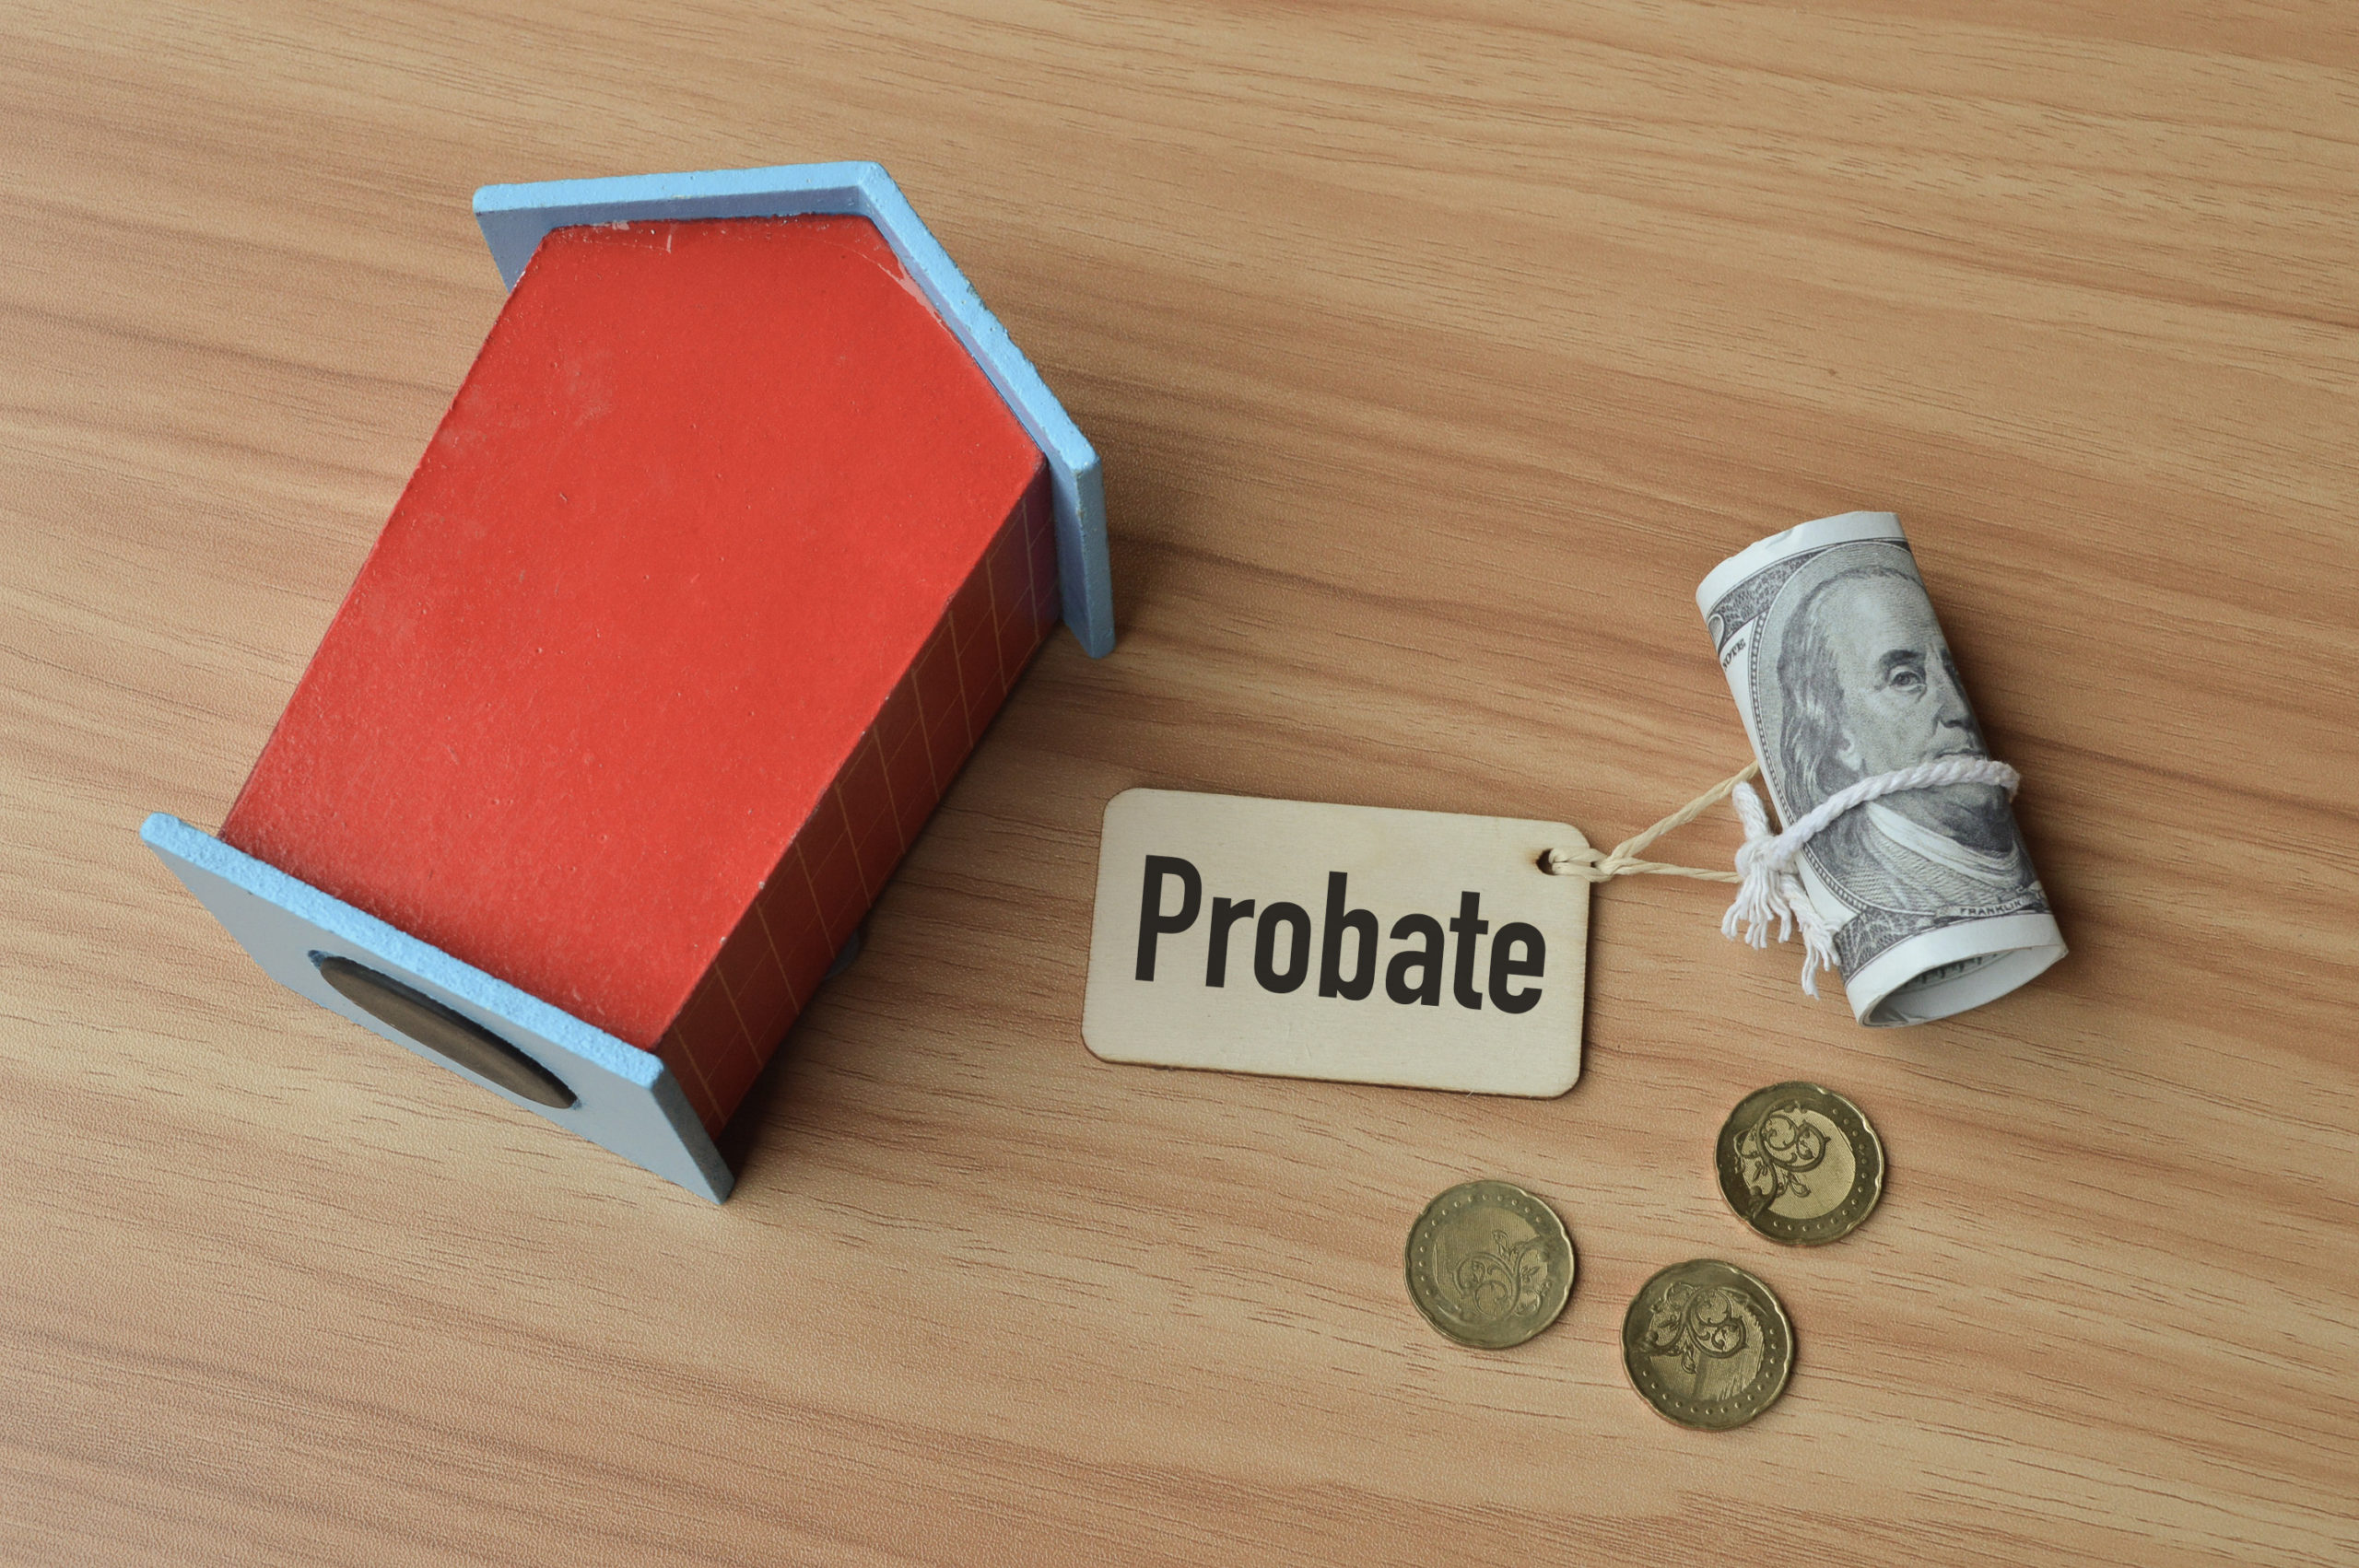 What Are Probate And Non-Probate Assets?